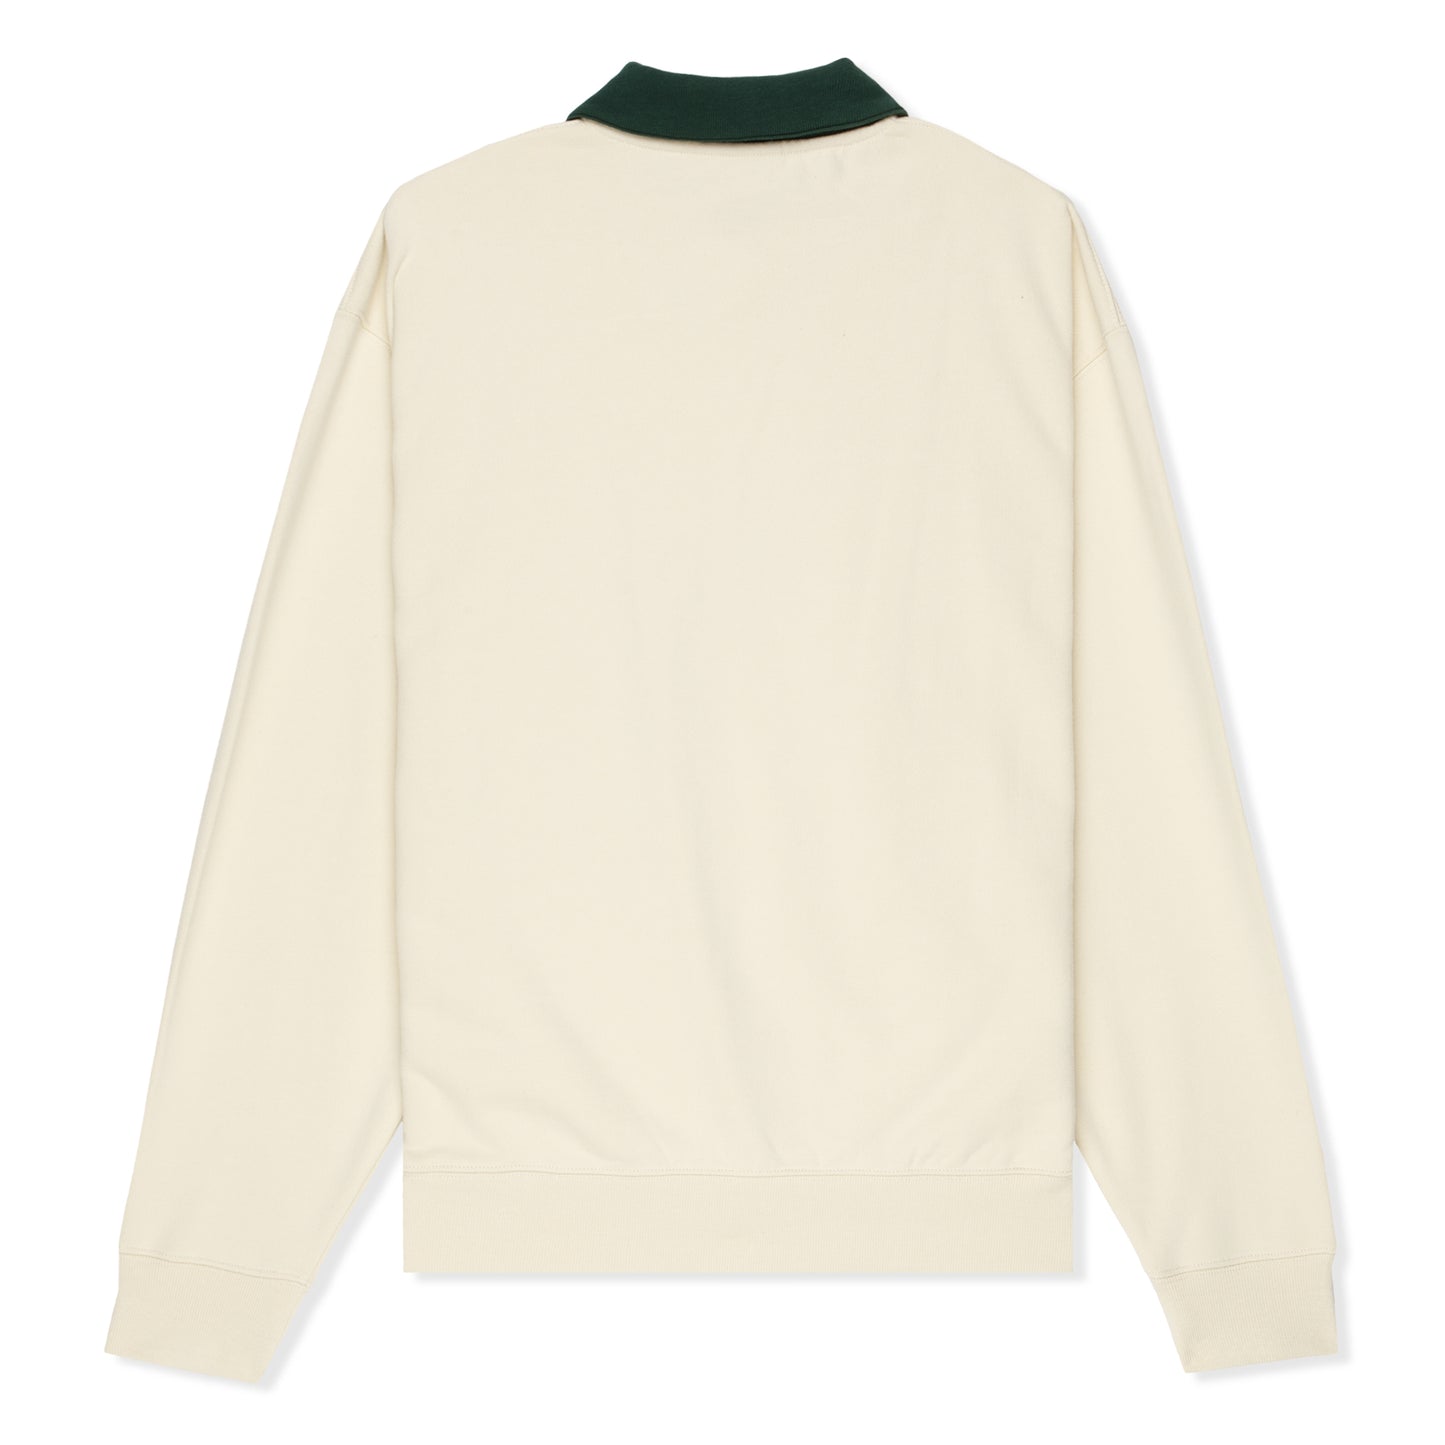 Grand Collection Collared Sweat Shirt (Cream/Forest)